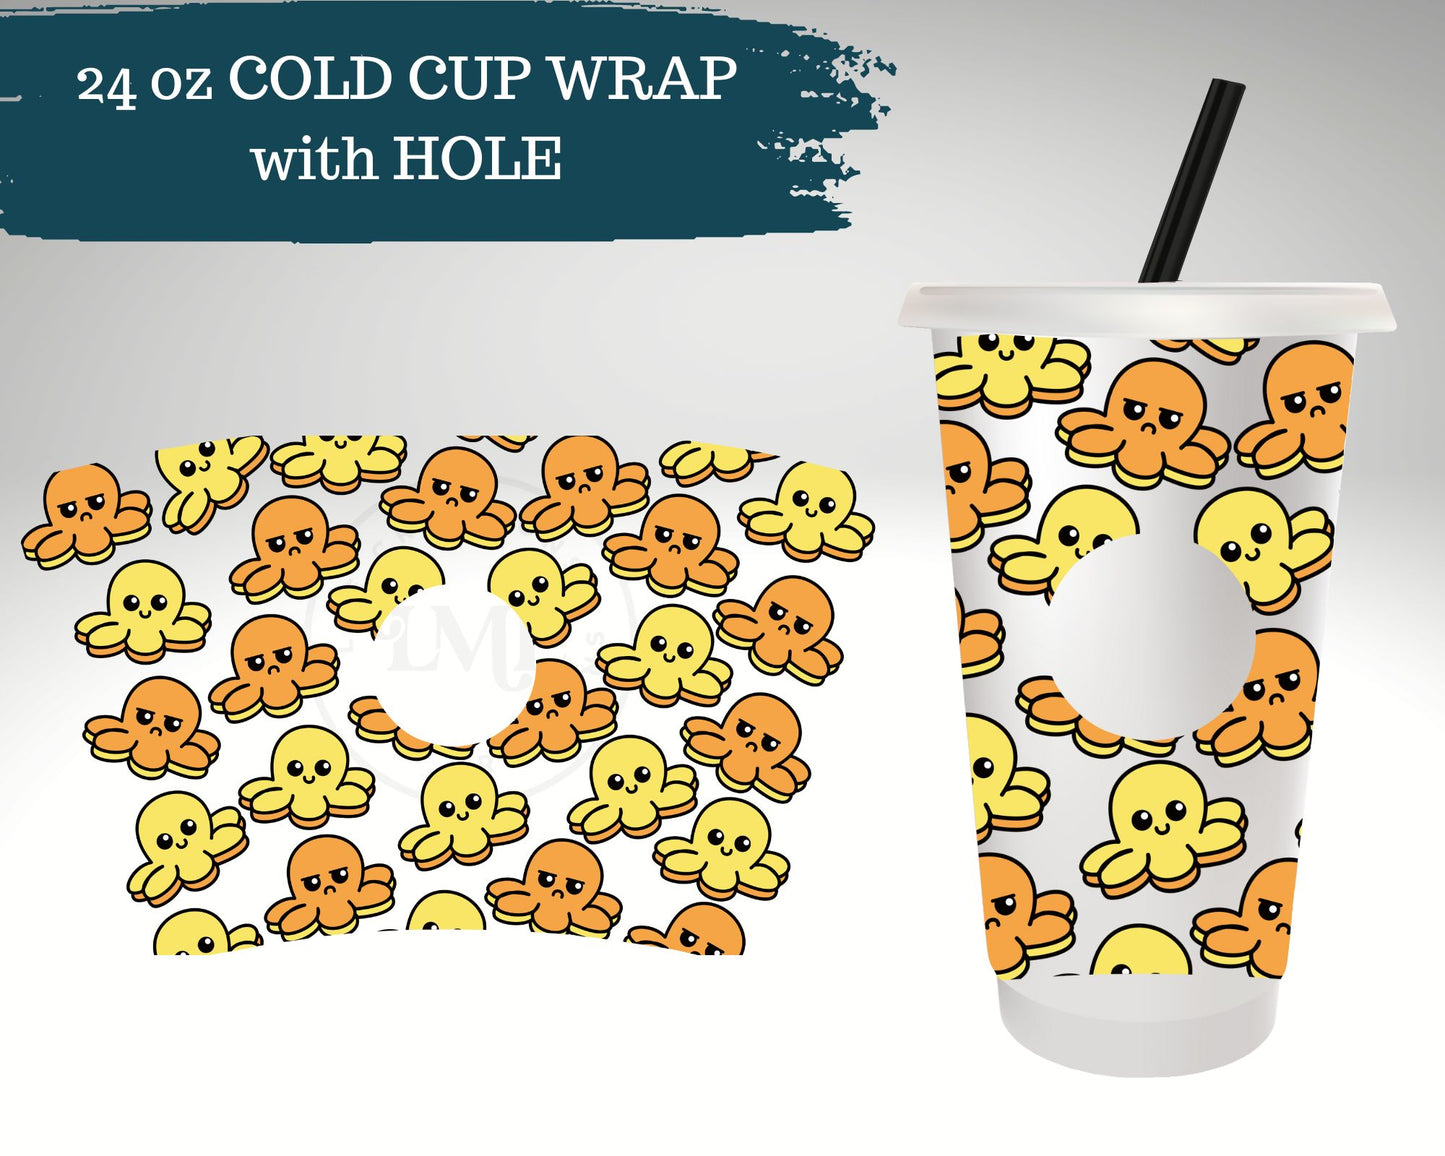 Reversible Octopus | 24 oz Cold Cup Wrap